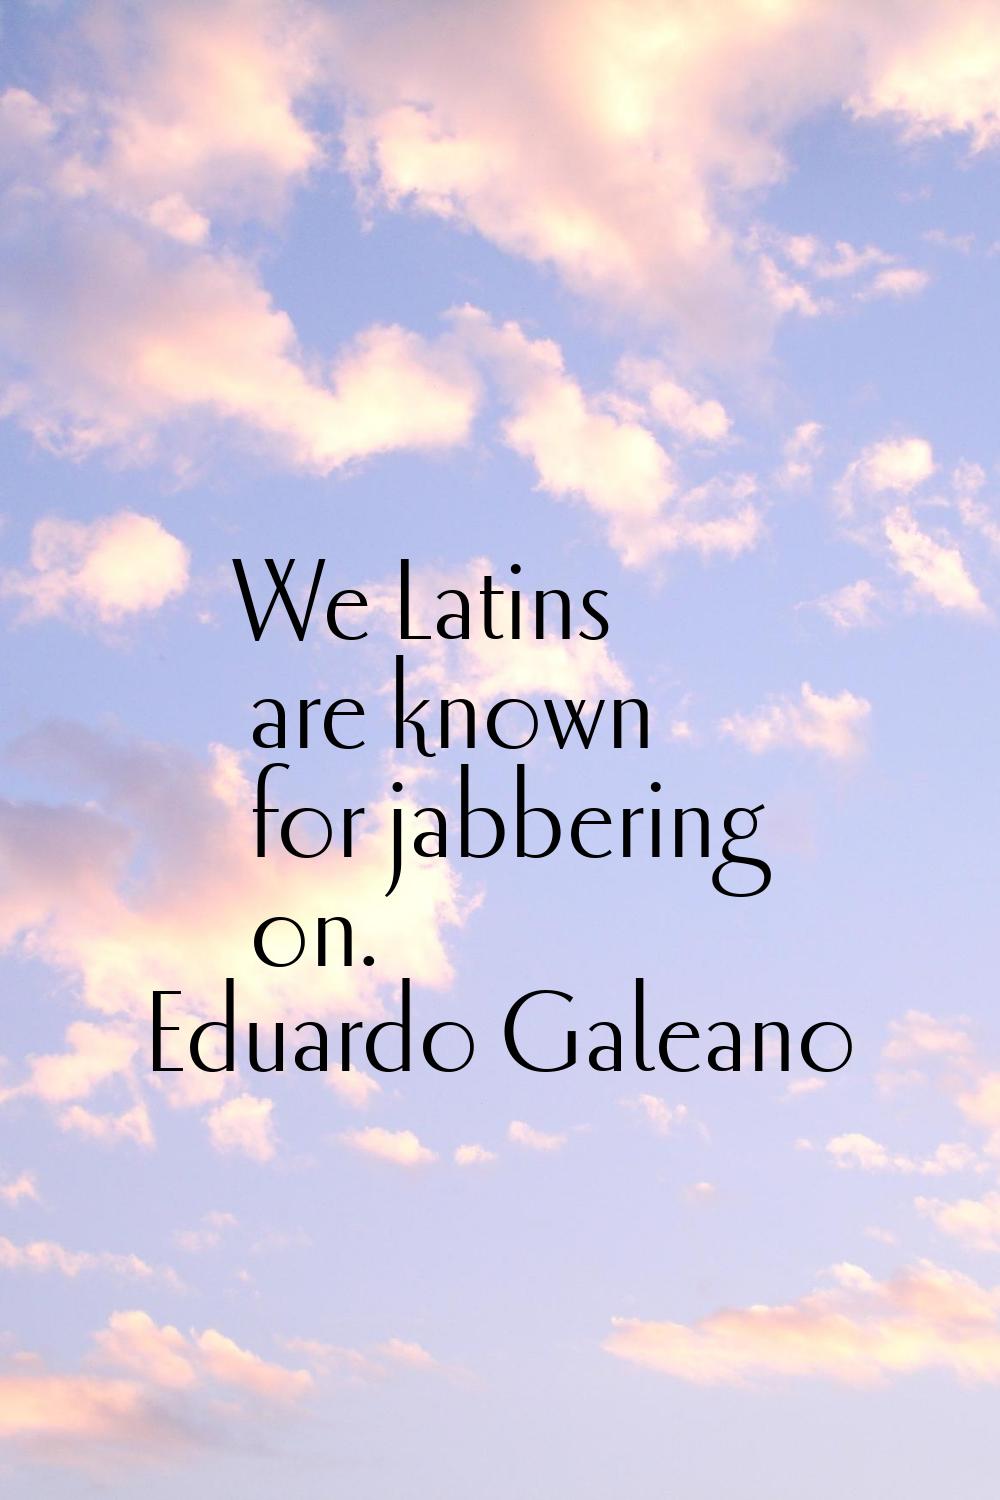 We Latins are known for jabbering on.